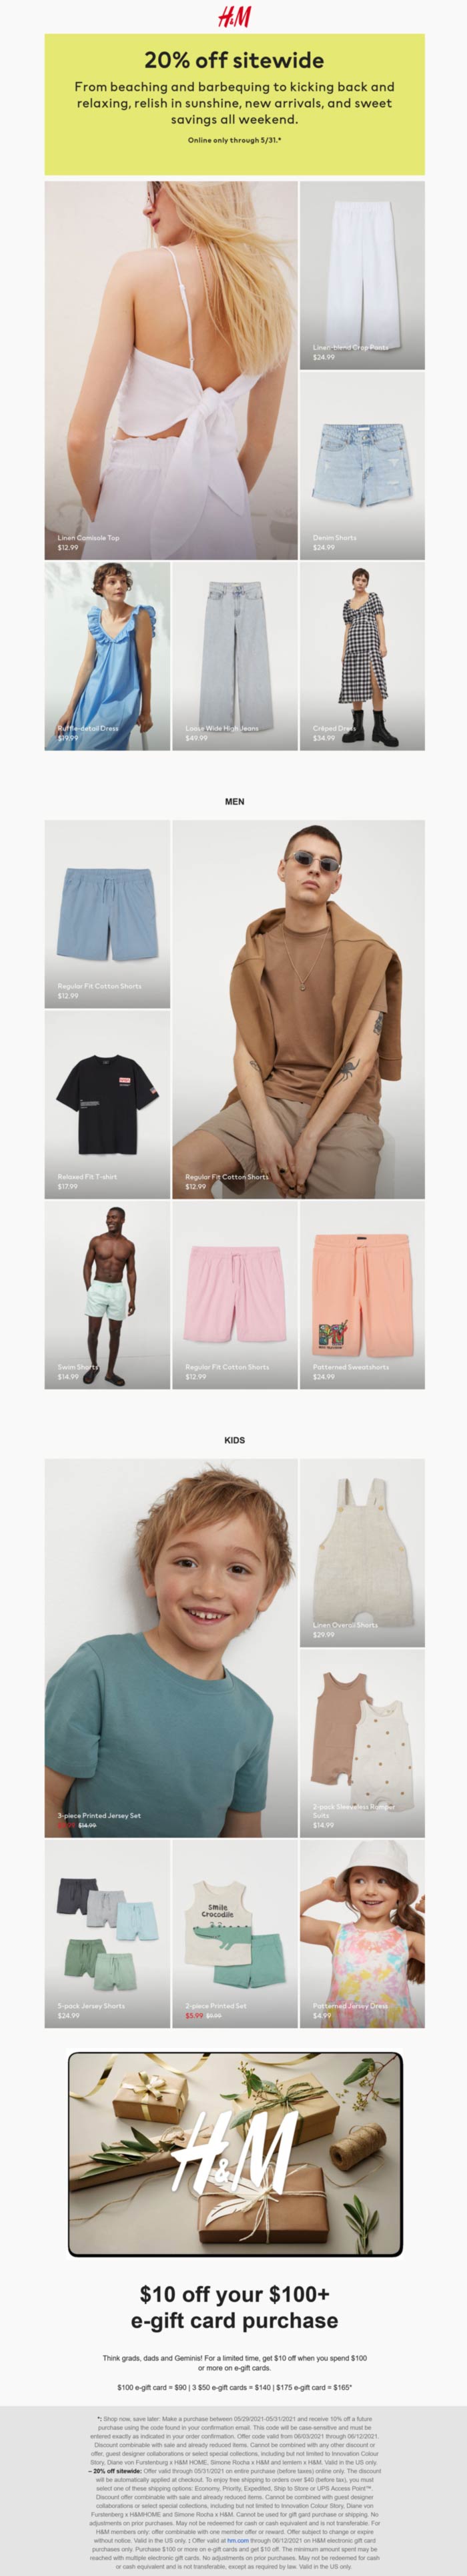 H&M stores Coupon  20% off everything online at H&M #hm 